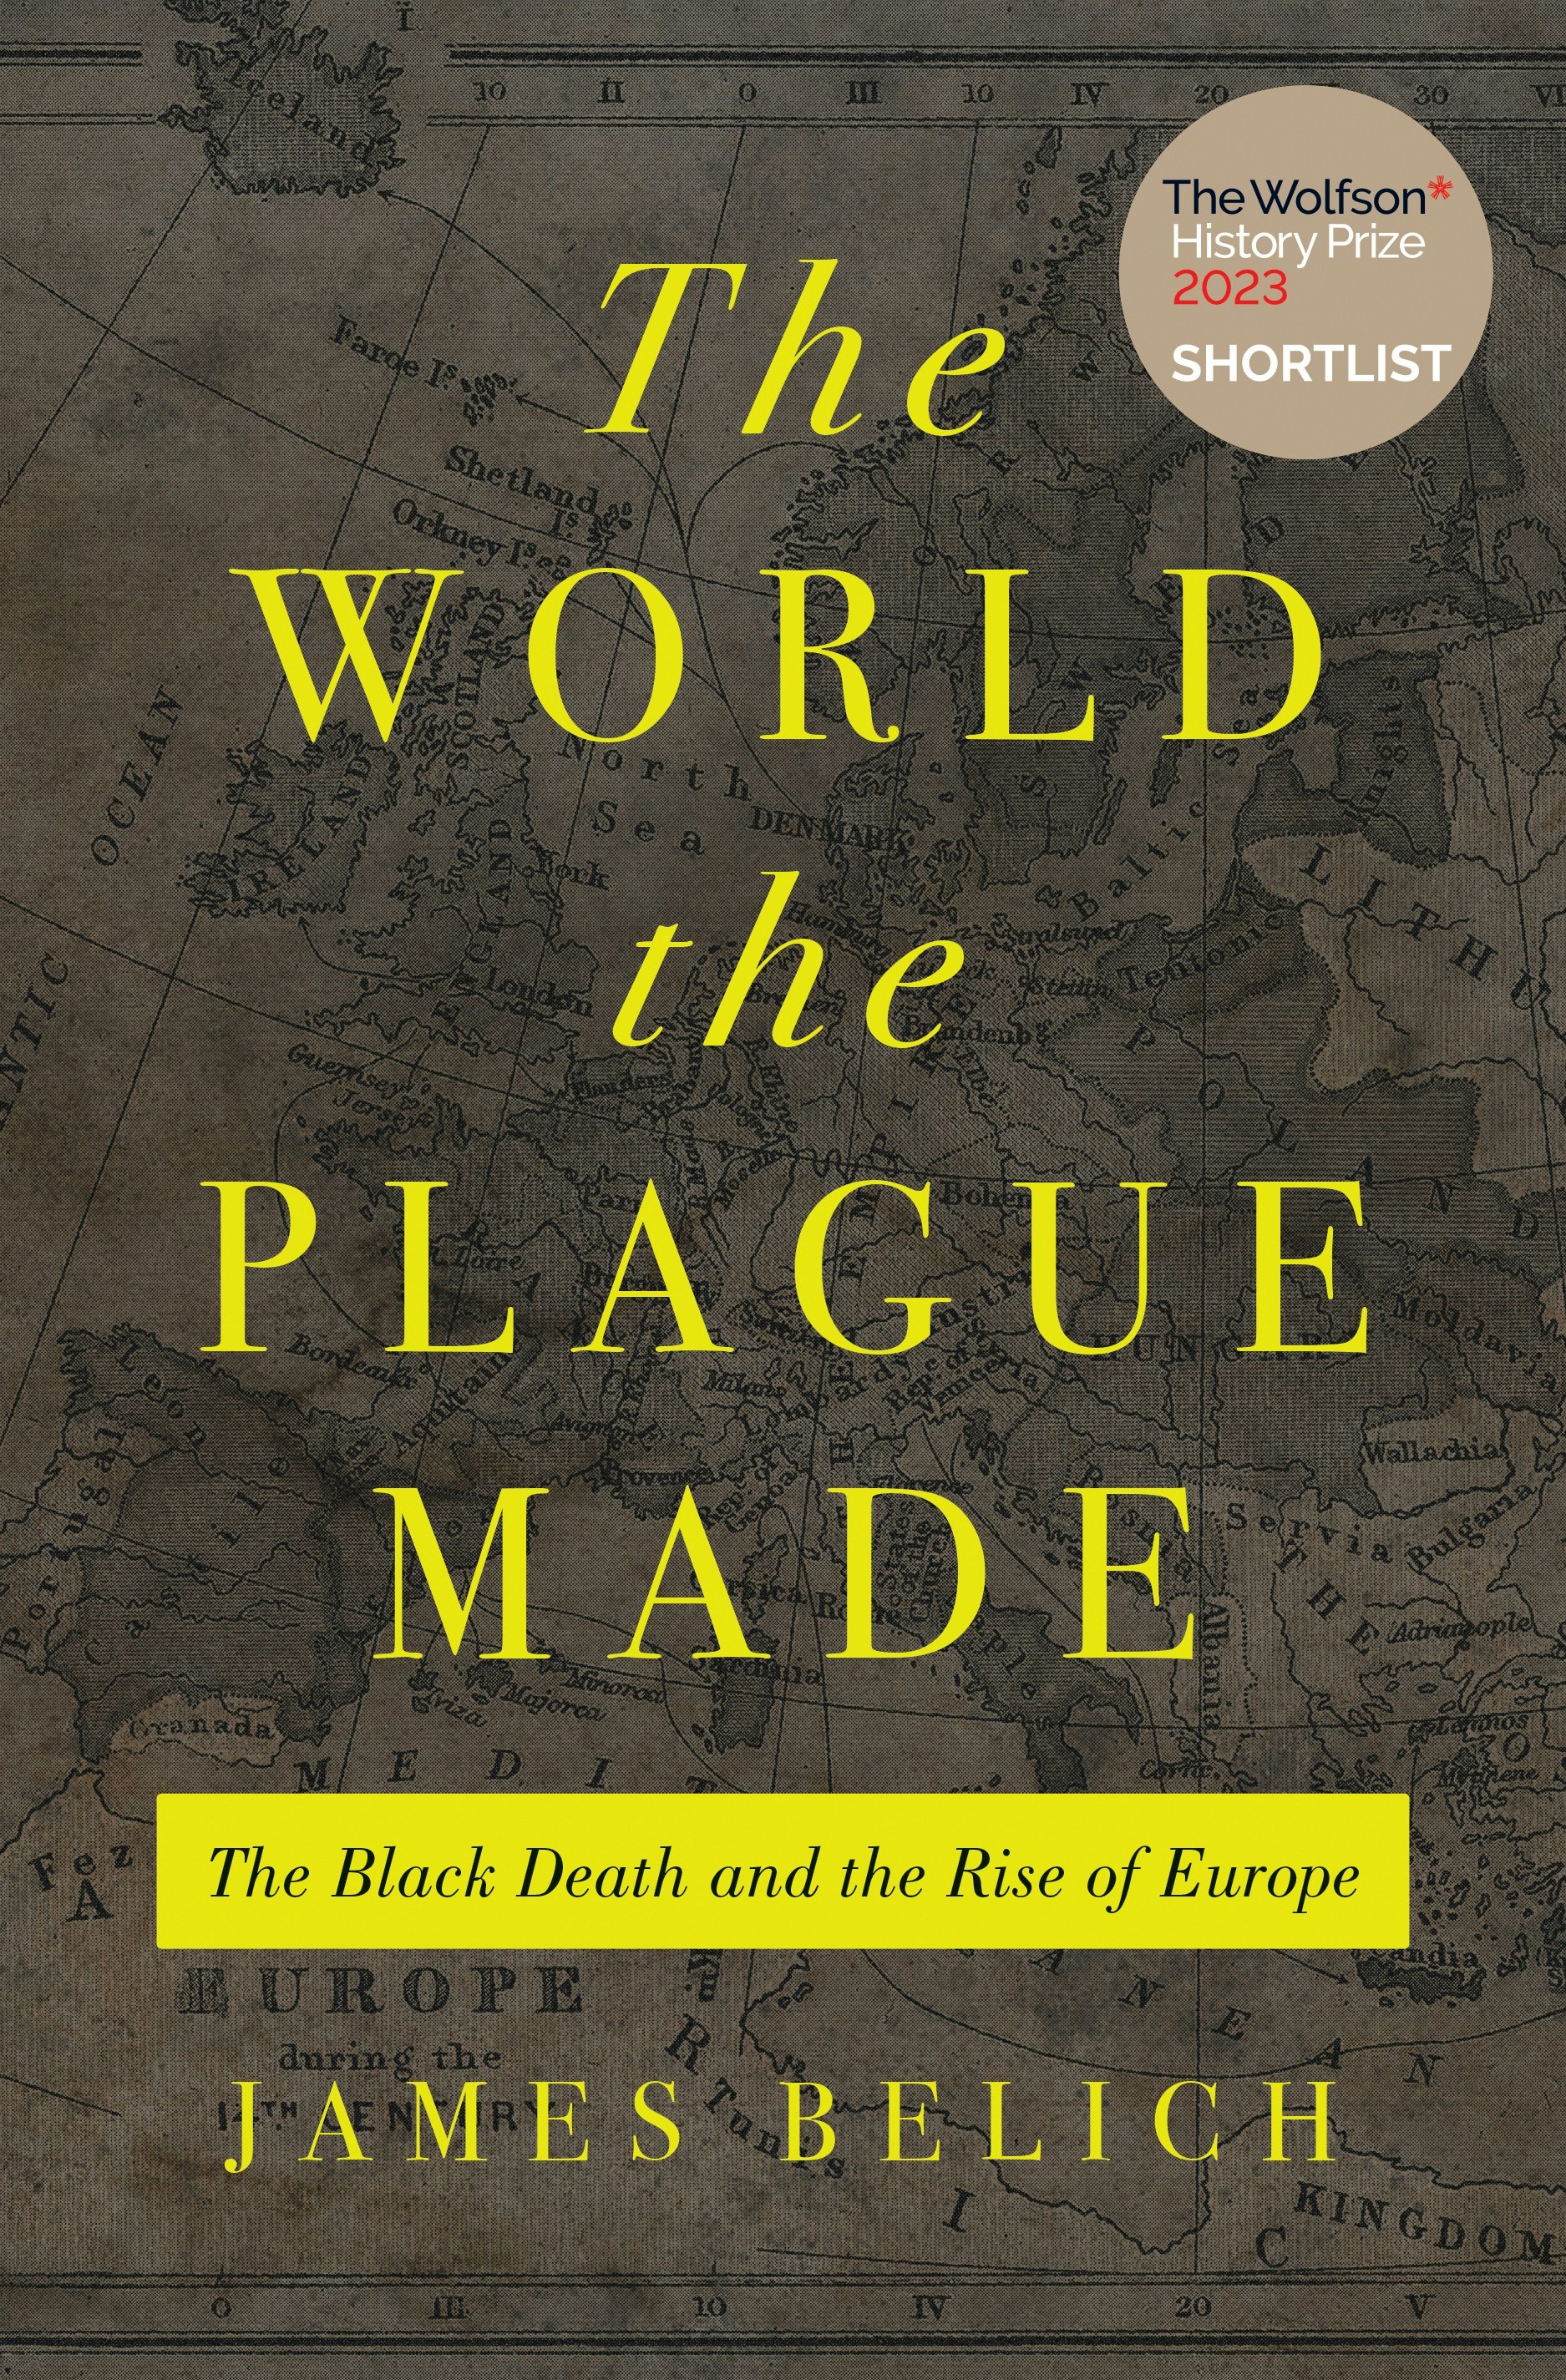 Rise　Black　Made:　The　World　The　Plague　the　Death　of　and　the　Europe